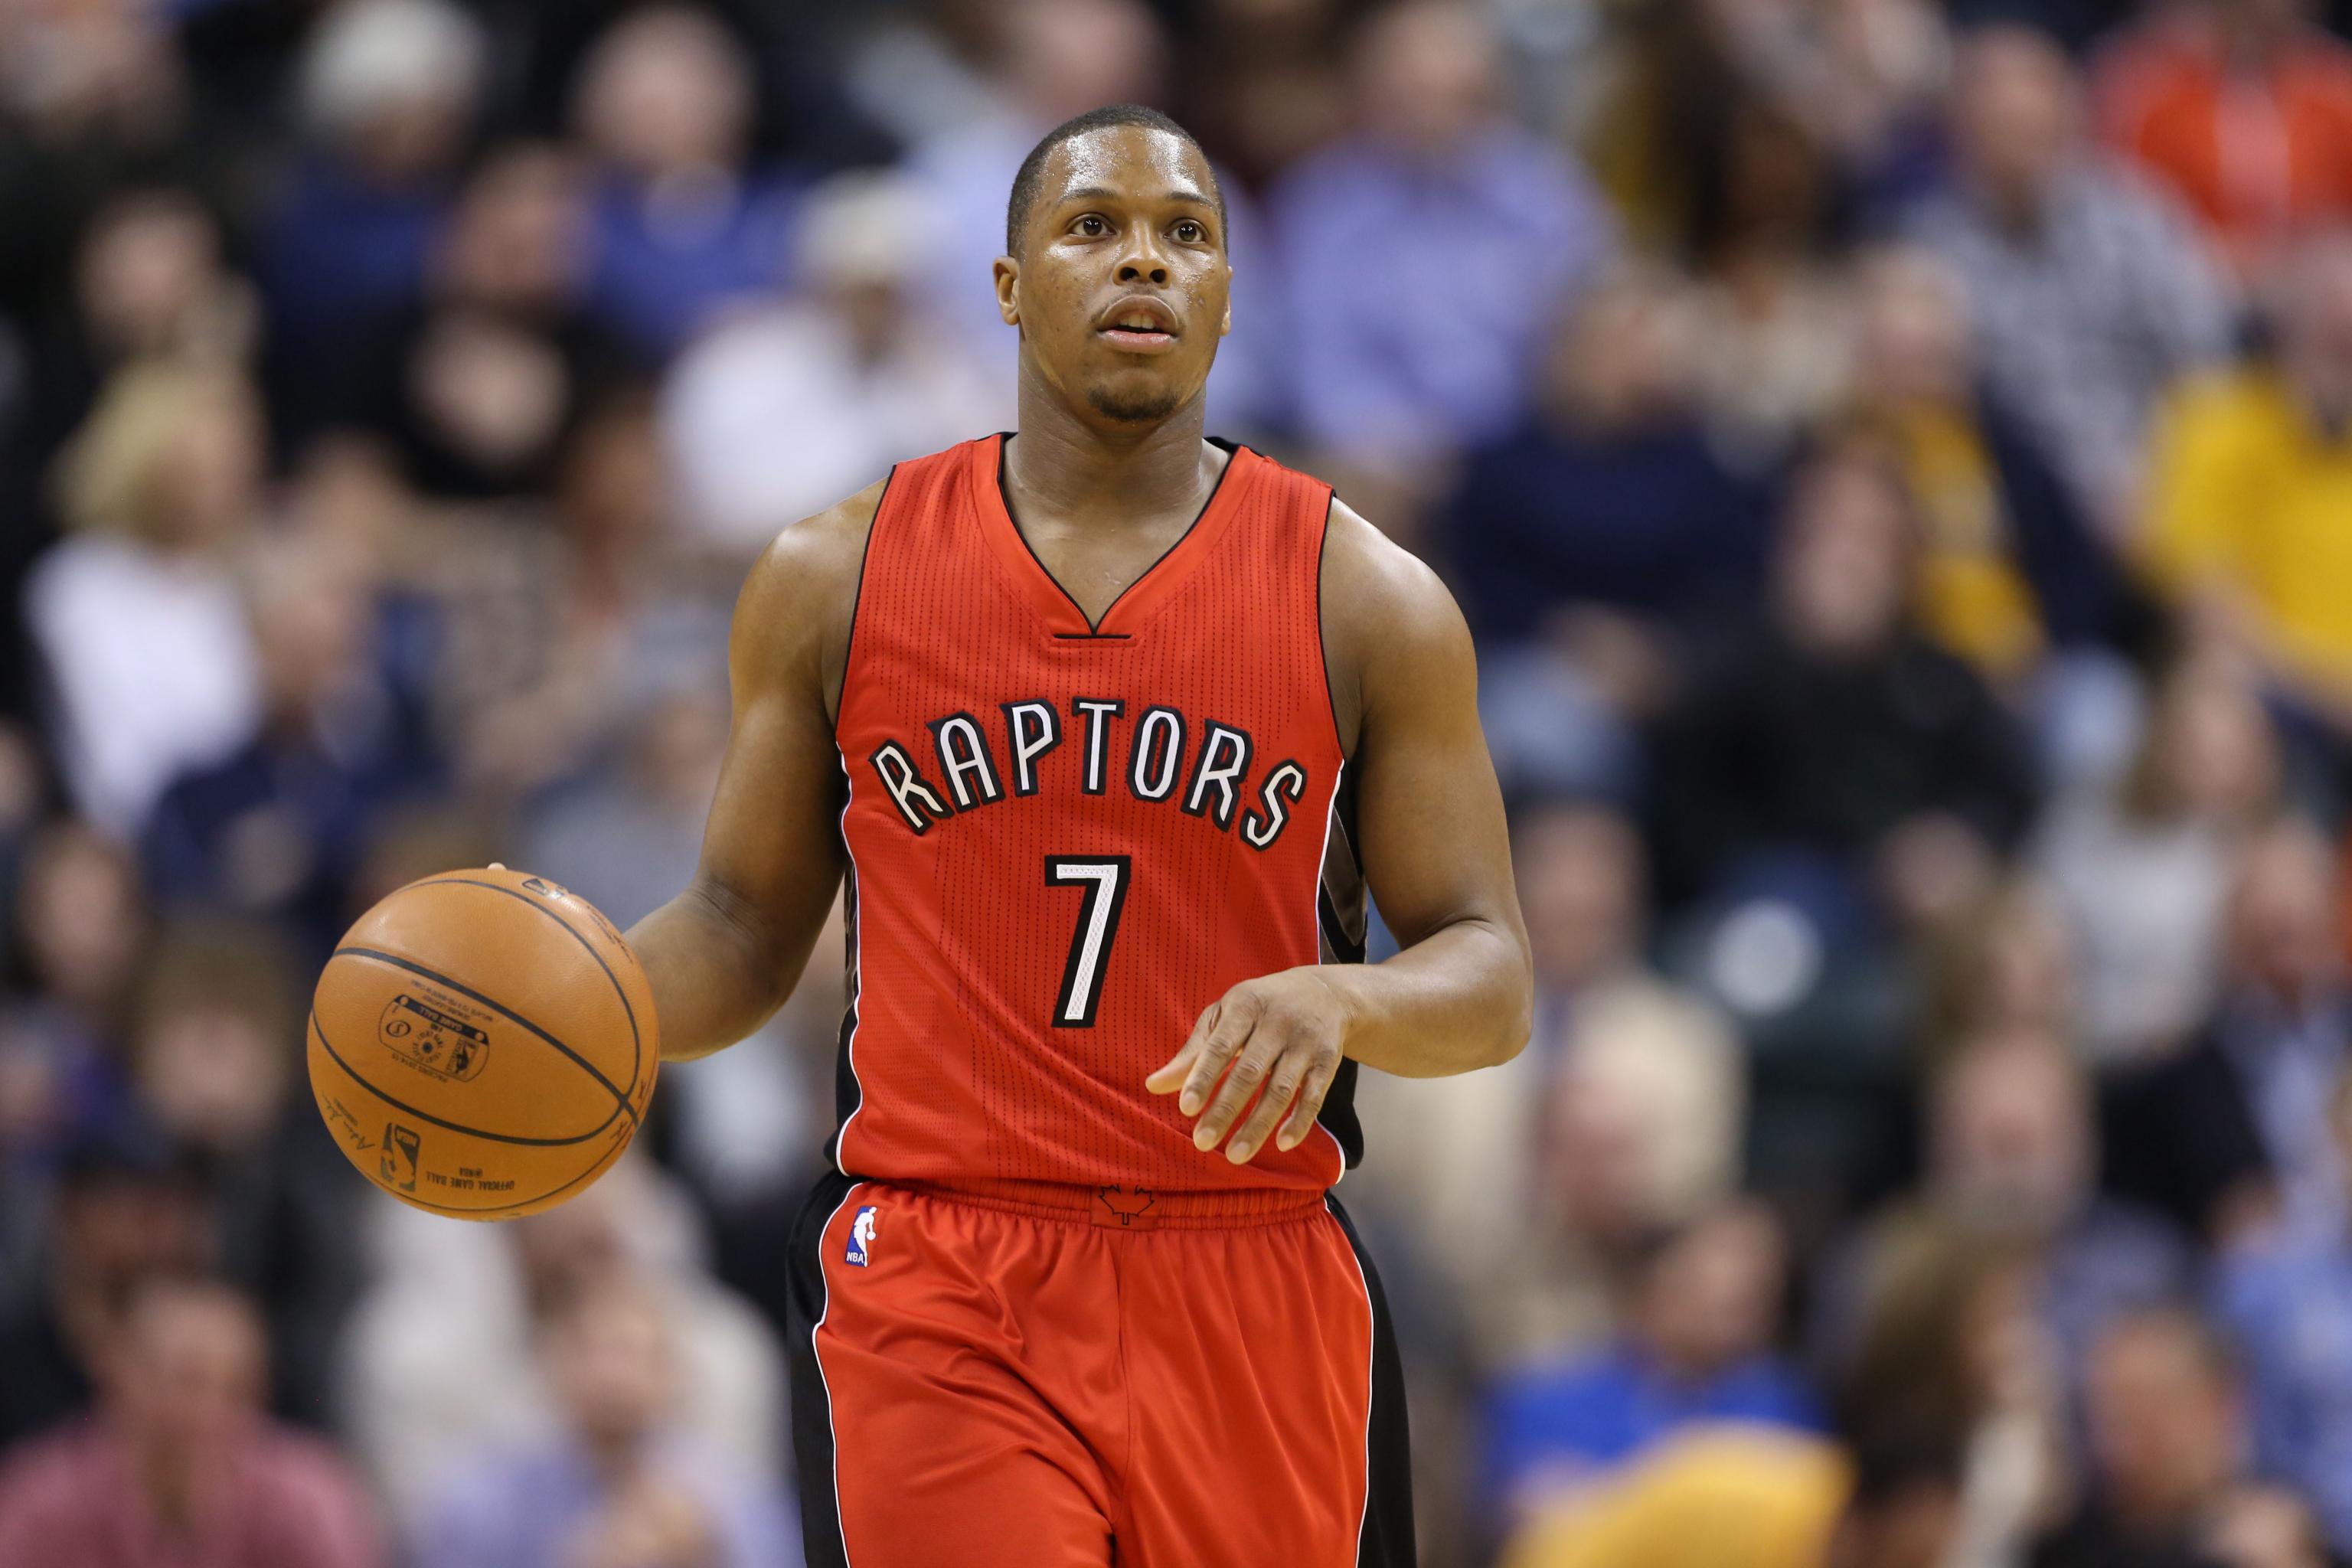 Long-time Raptor Kyle Lowry returns to Toronto to power Heat victory